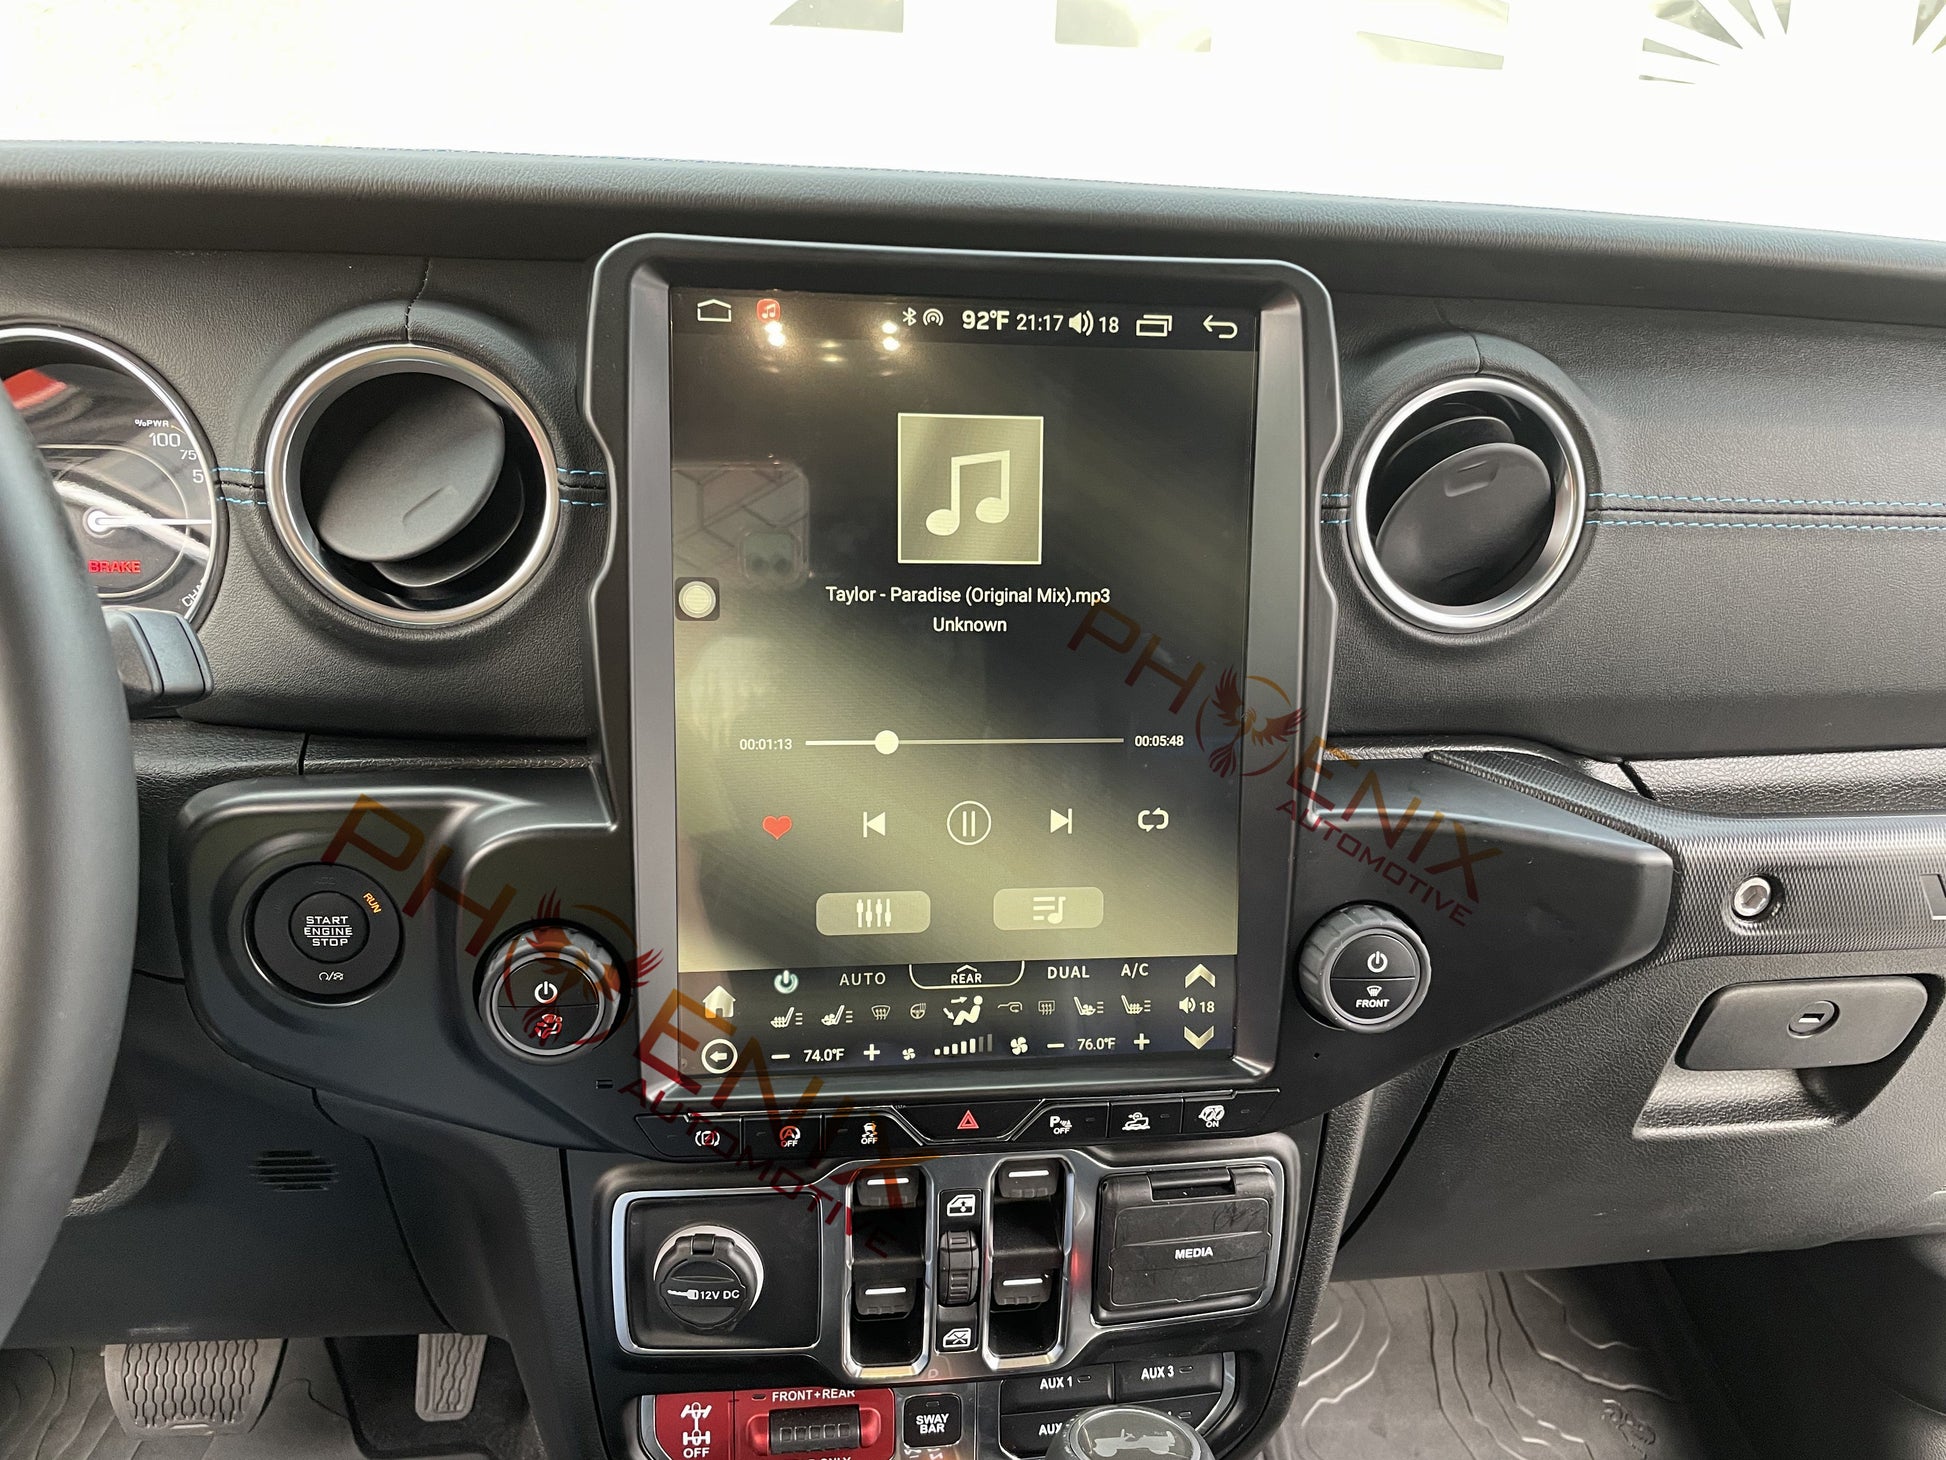 [Open Box] 12.1” Android 9 / 10 / 12 Vertical Screen Navigation Radio for Jeep Wrangler JL 2018 - 2022